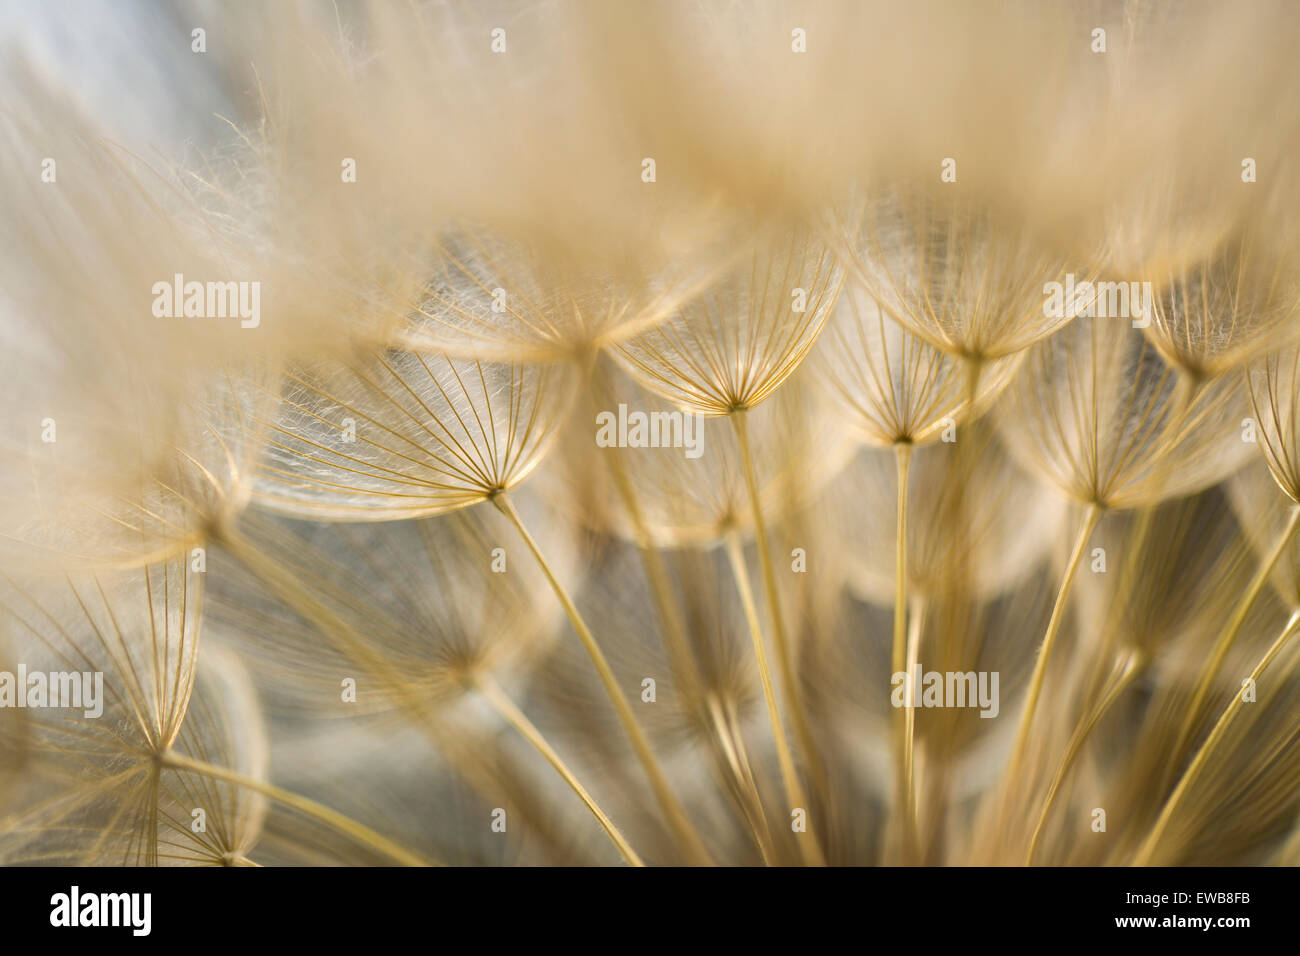 Dandelion family, Geropogon hybridus is native to the Mediterranean and adjacent areas. Photographed in Israel in March Stock Photo